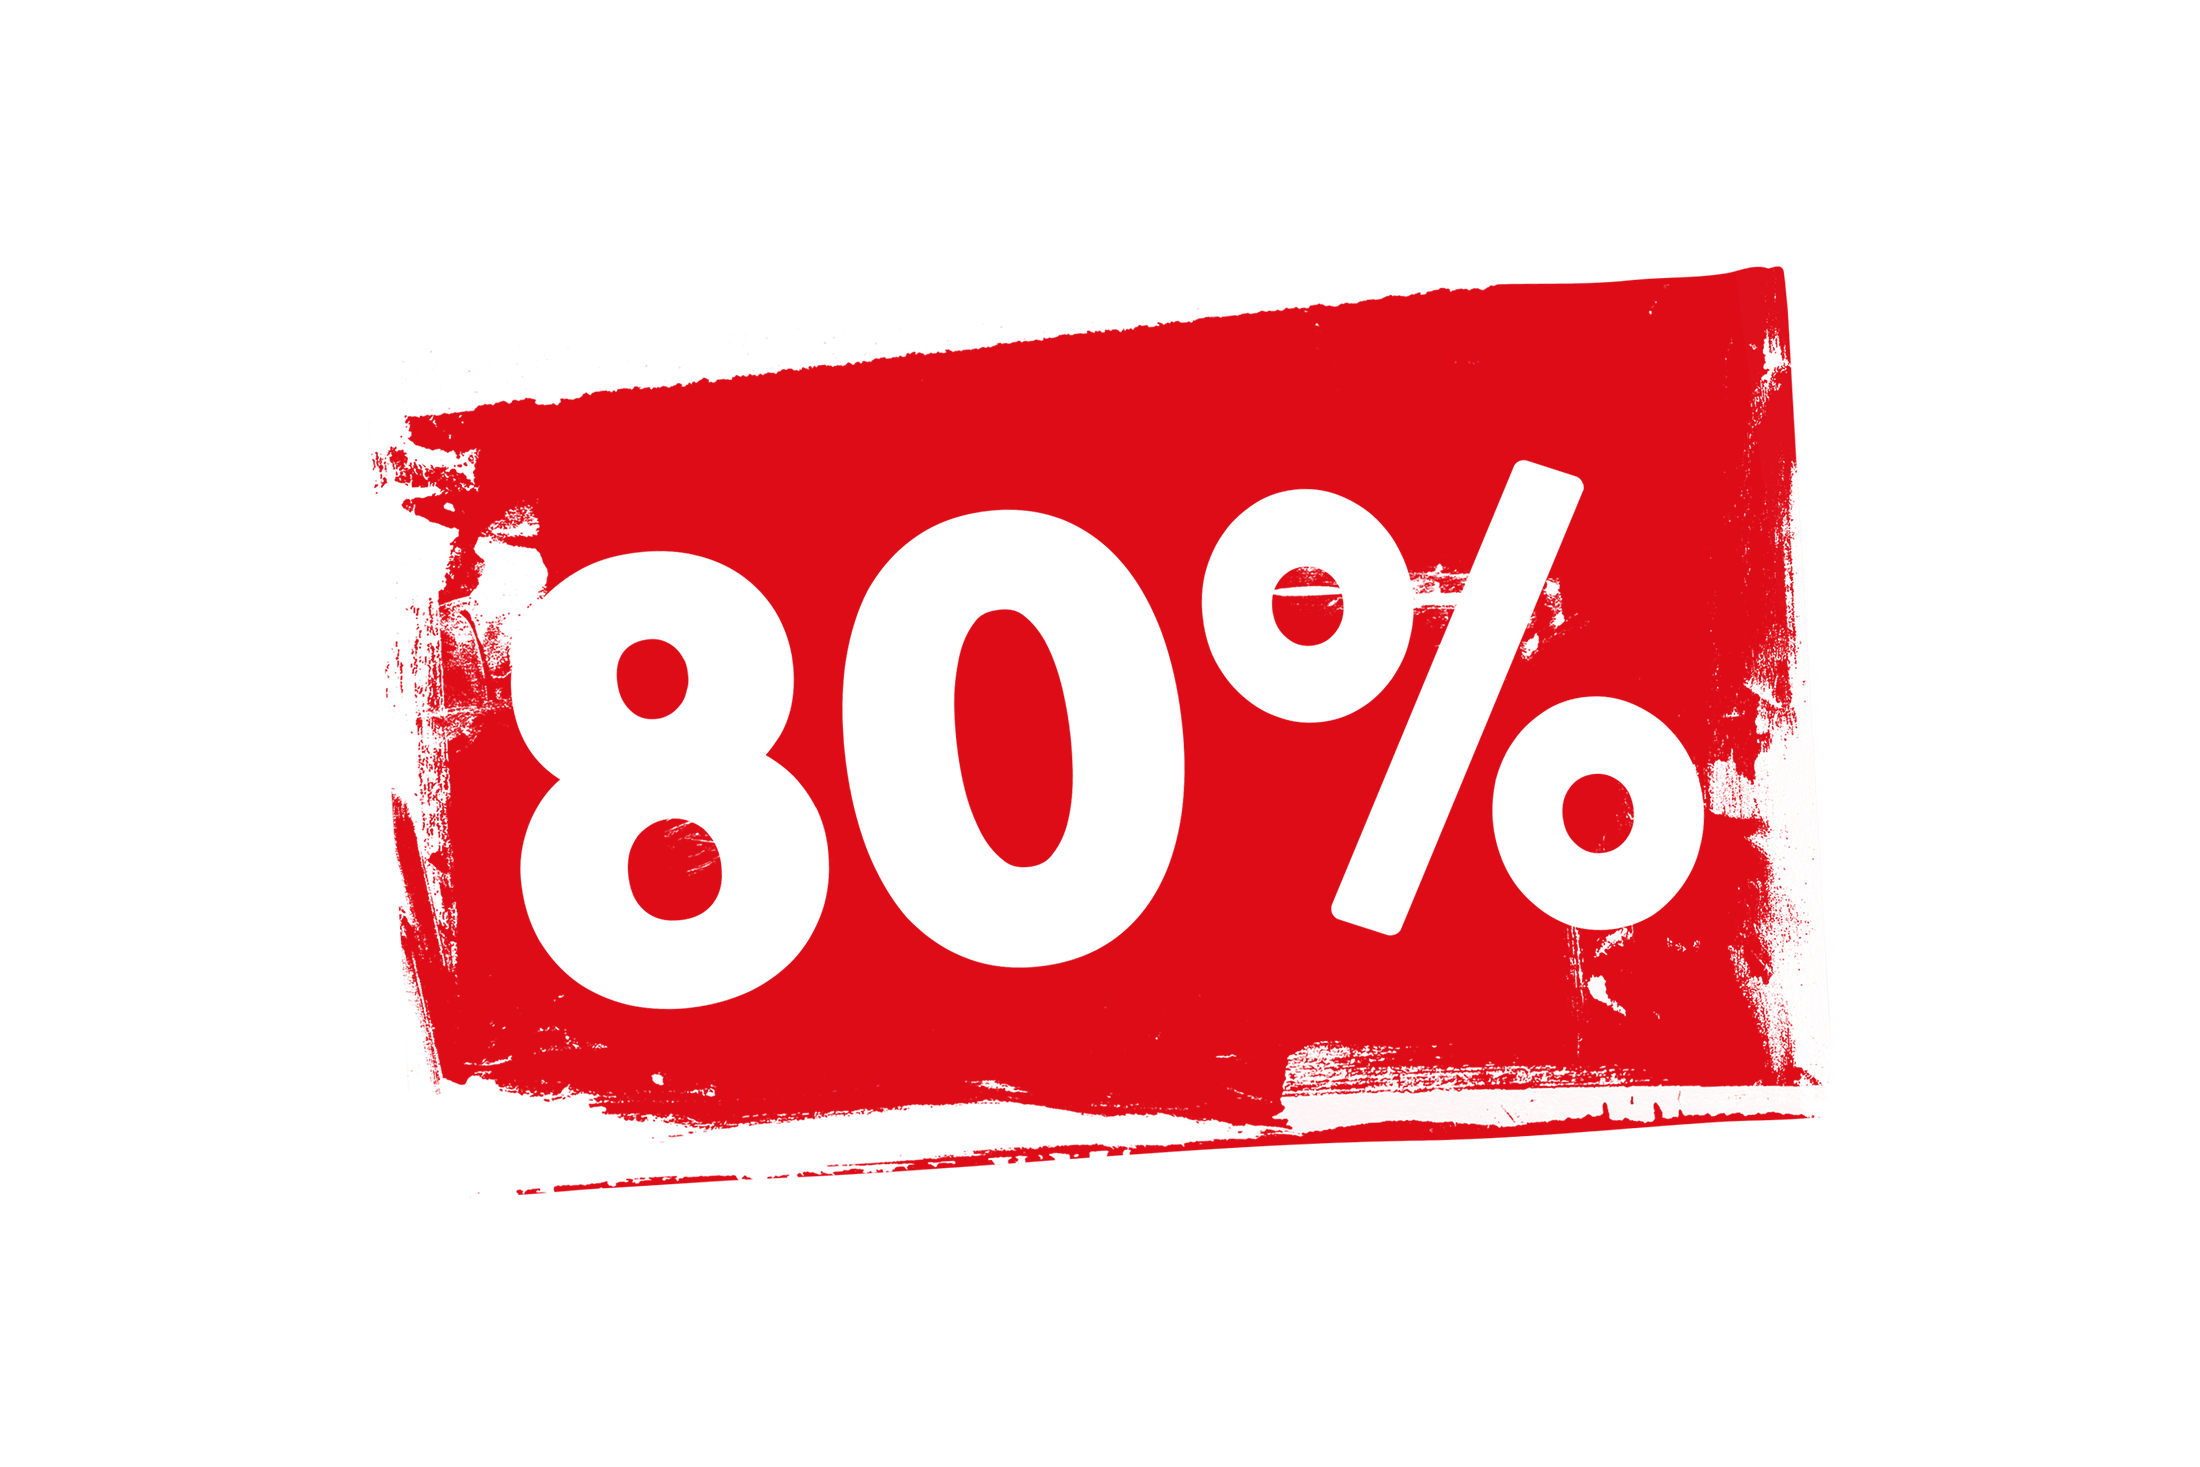 Grunge 80 percent label PNG and PSD